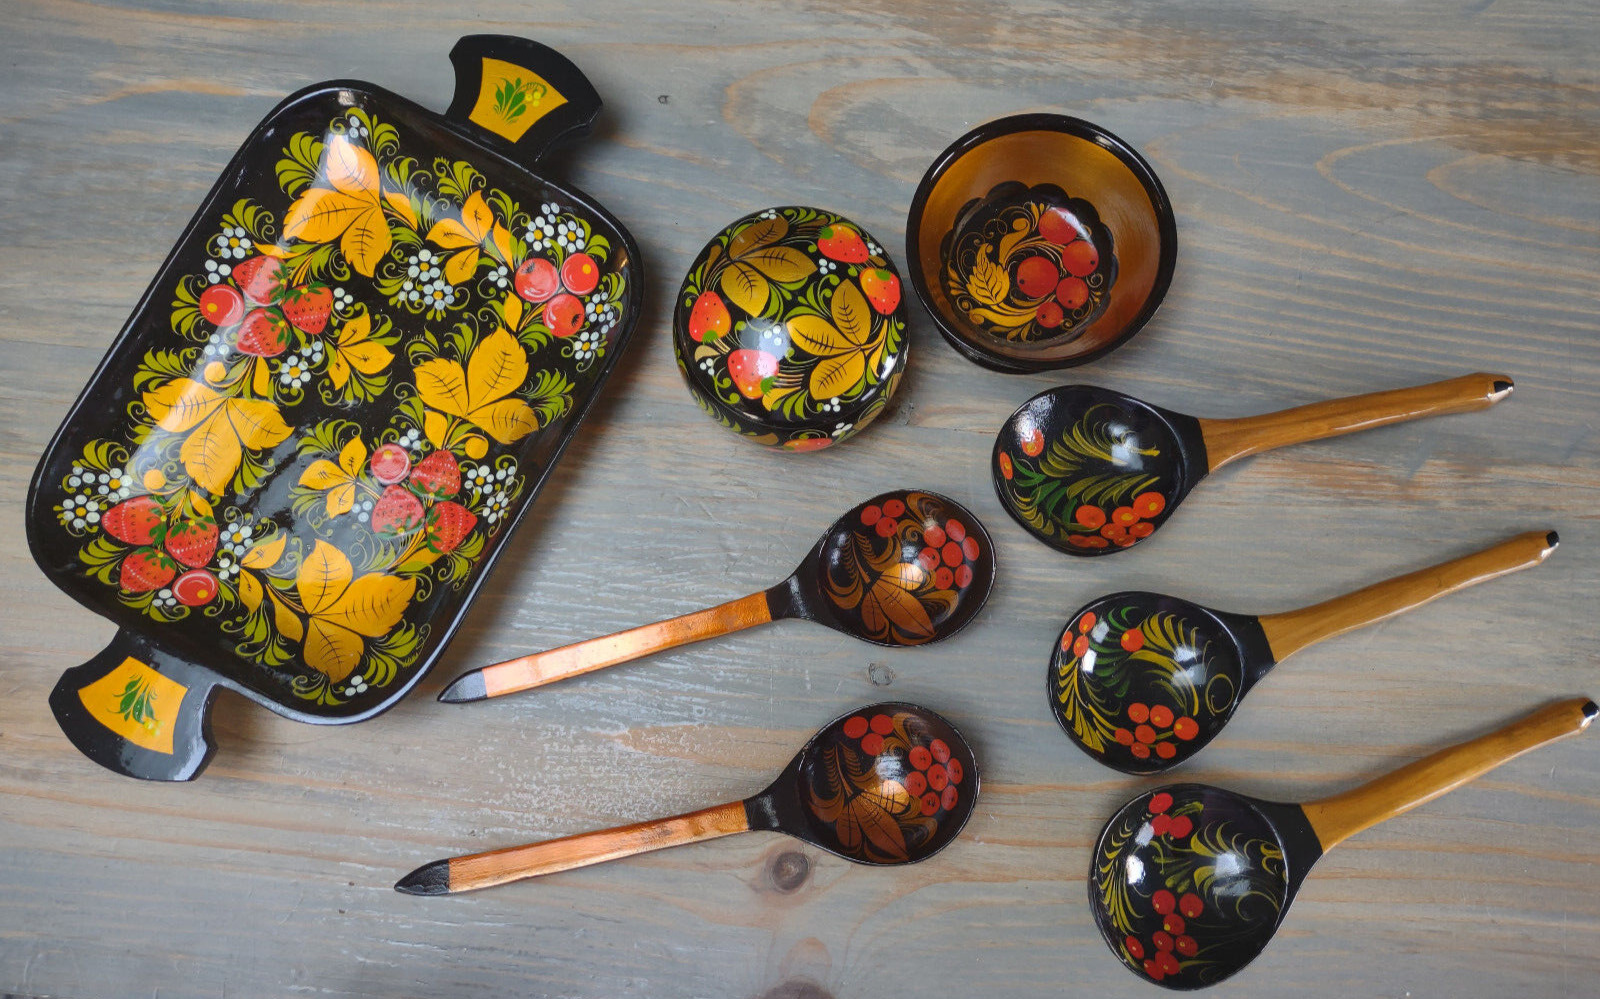 Vintage Russian Handpainted Lacquered Tray, 5 Spoons, 2 Bowls